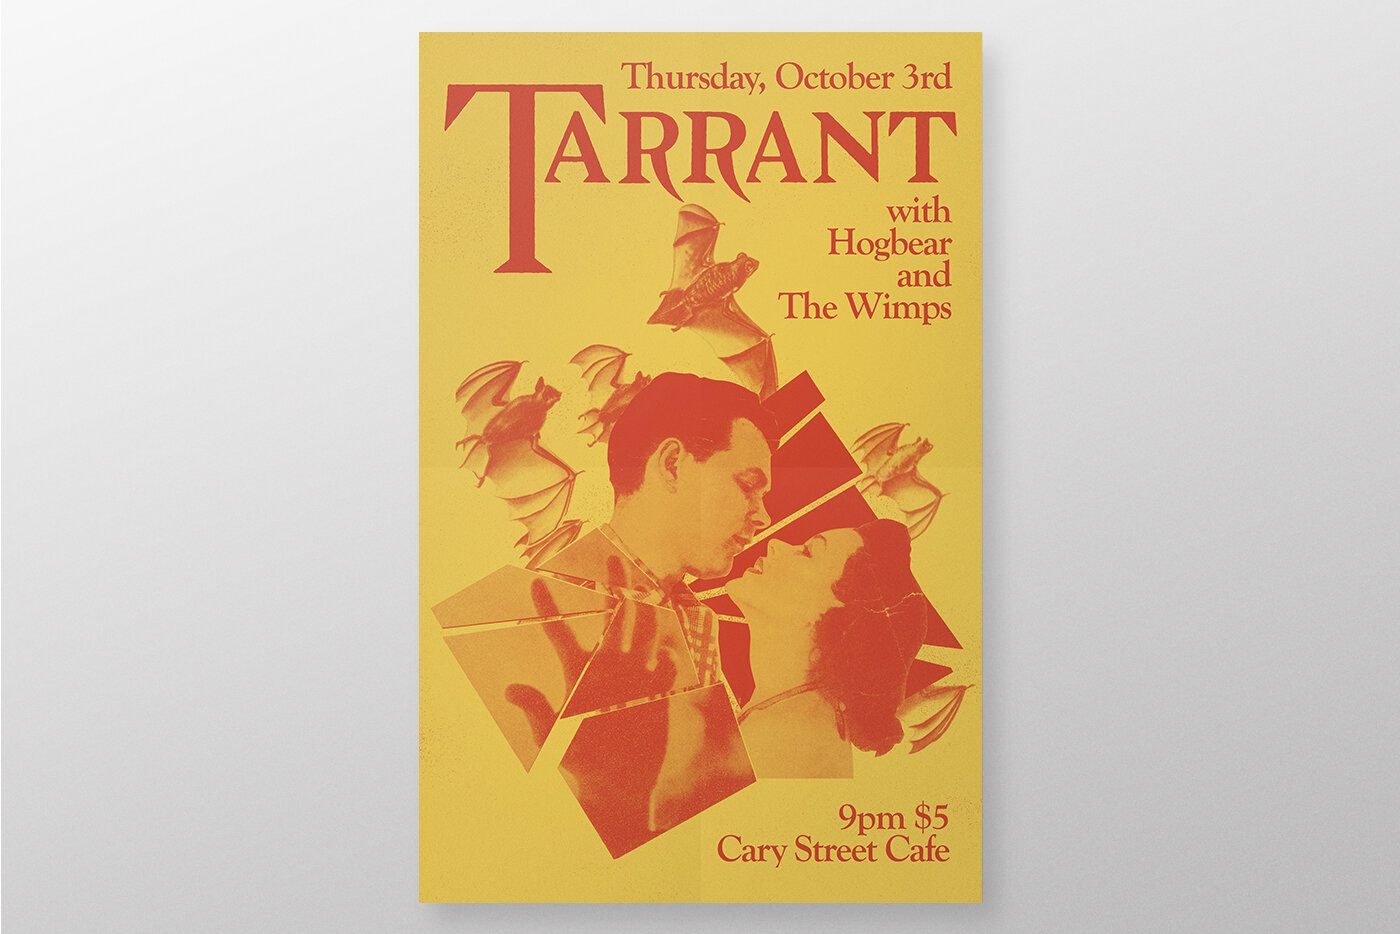 Cary Street Cafe Gig Poster